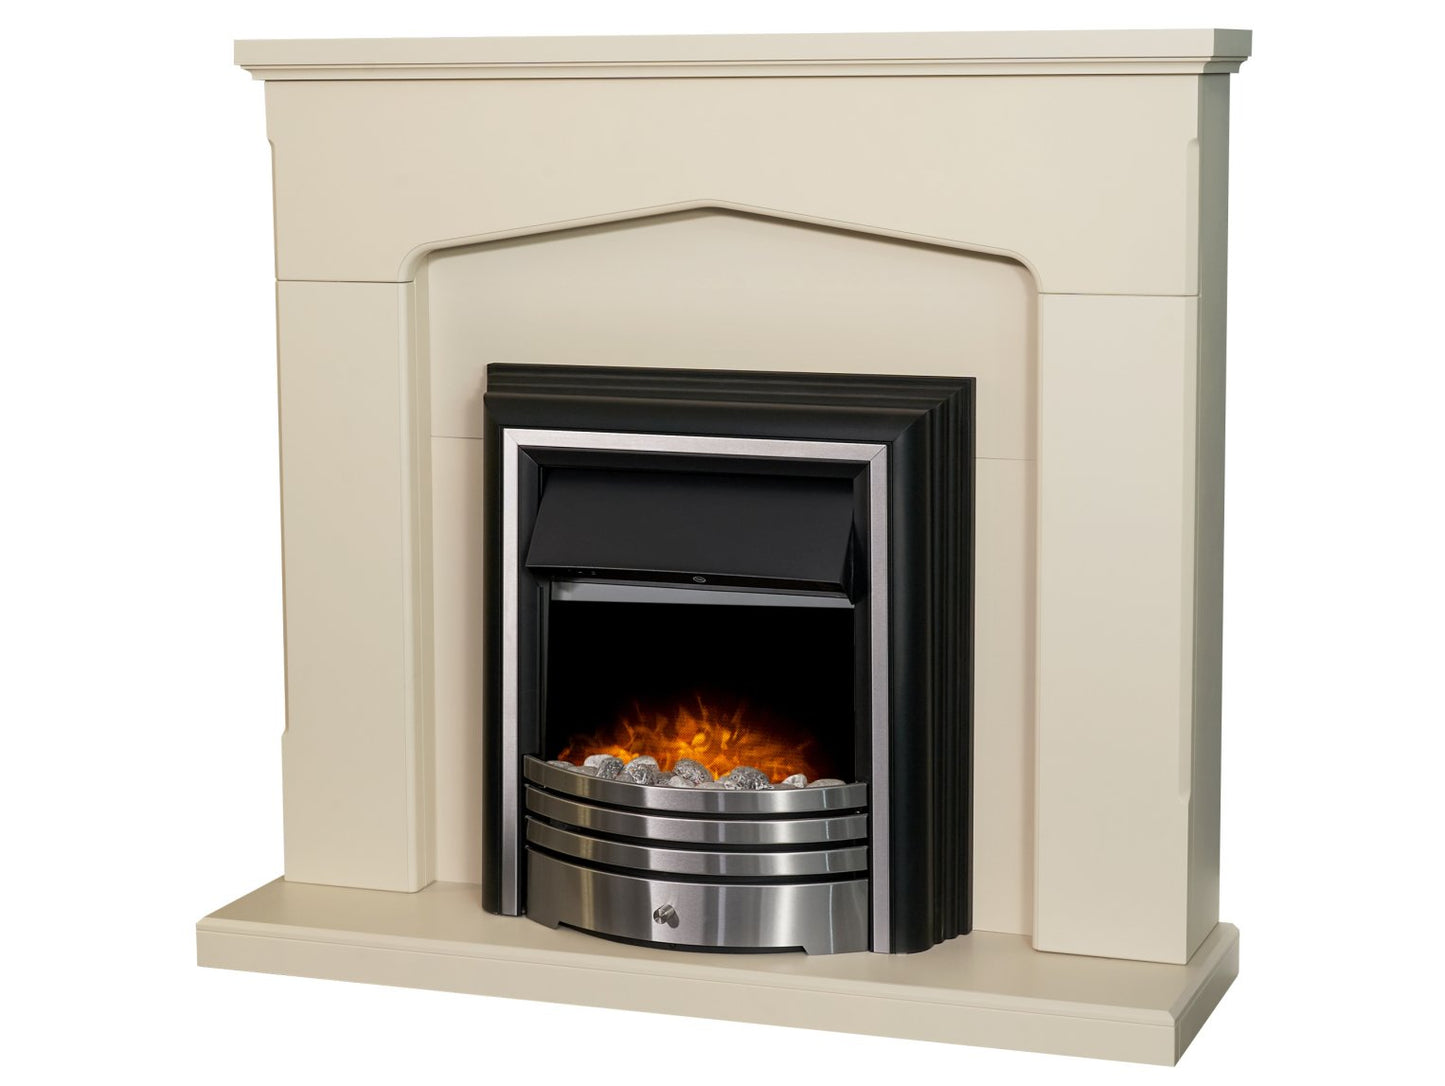 Adam Cotswold Fireplace Stone Effect + York Freestanding Electric Fire Brushed Steel, 48"